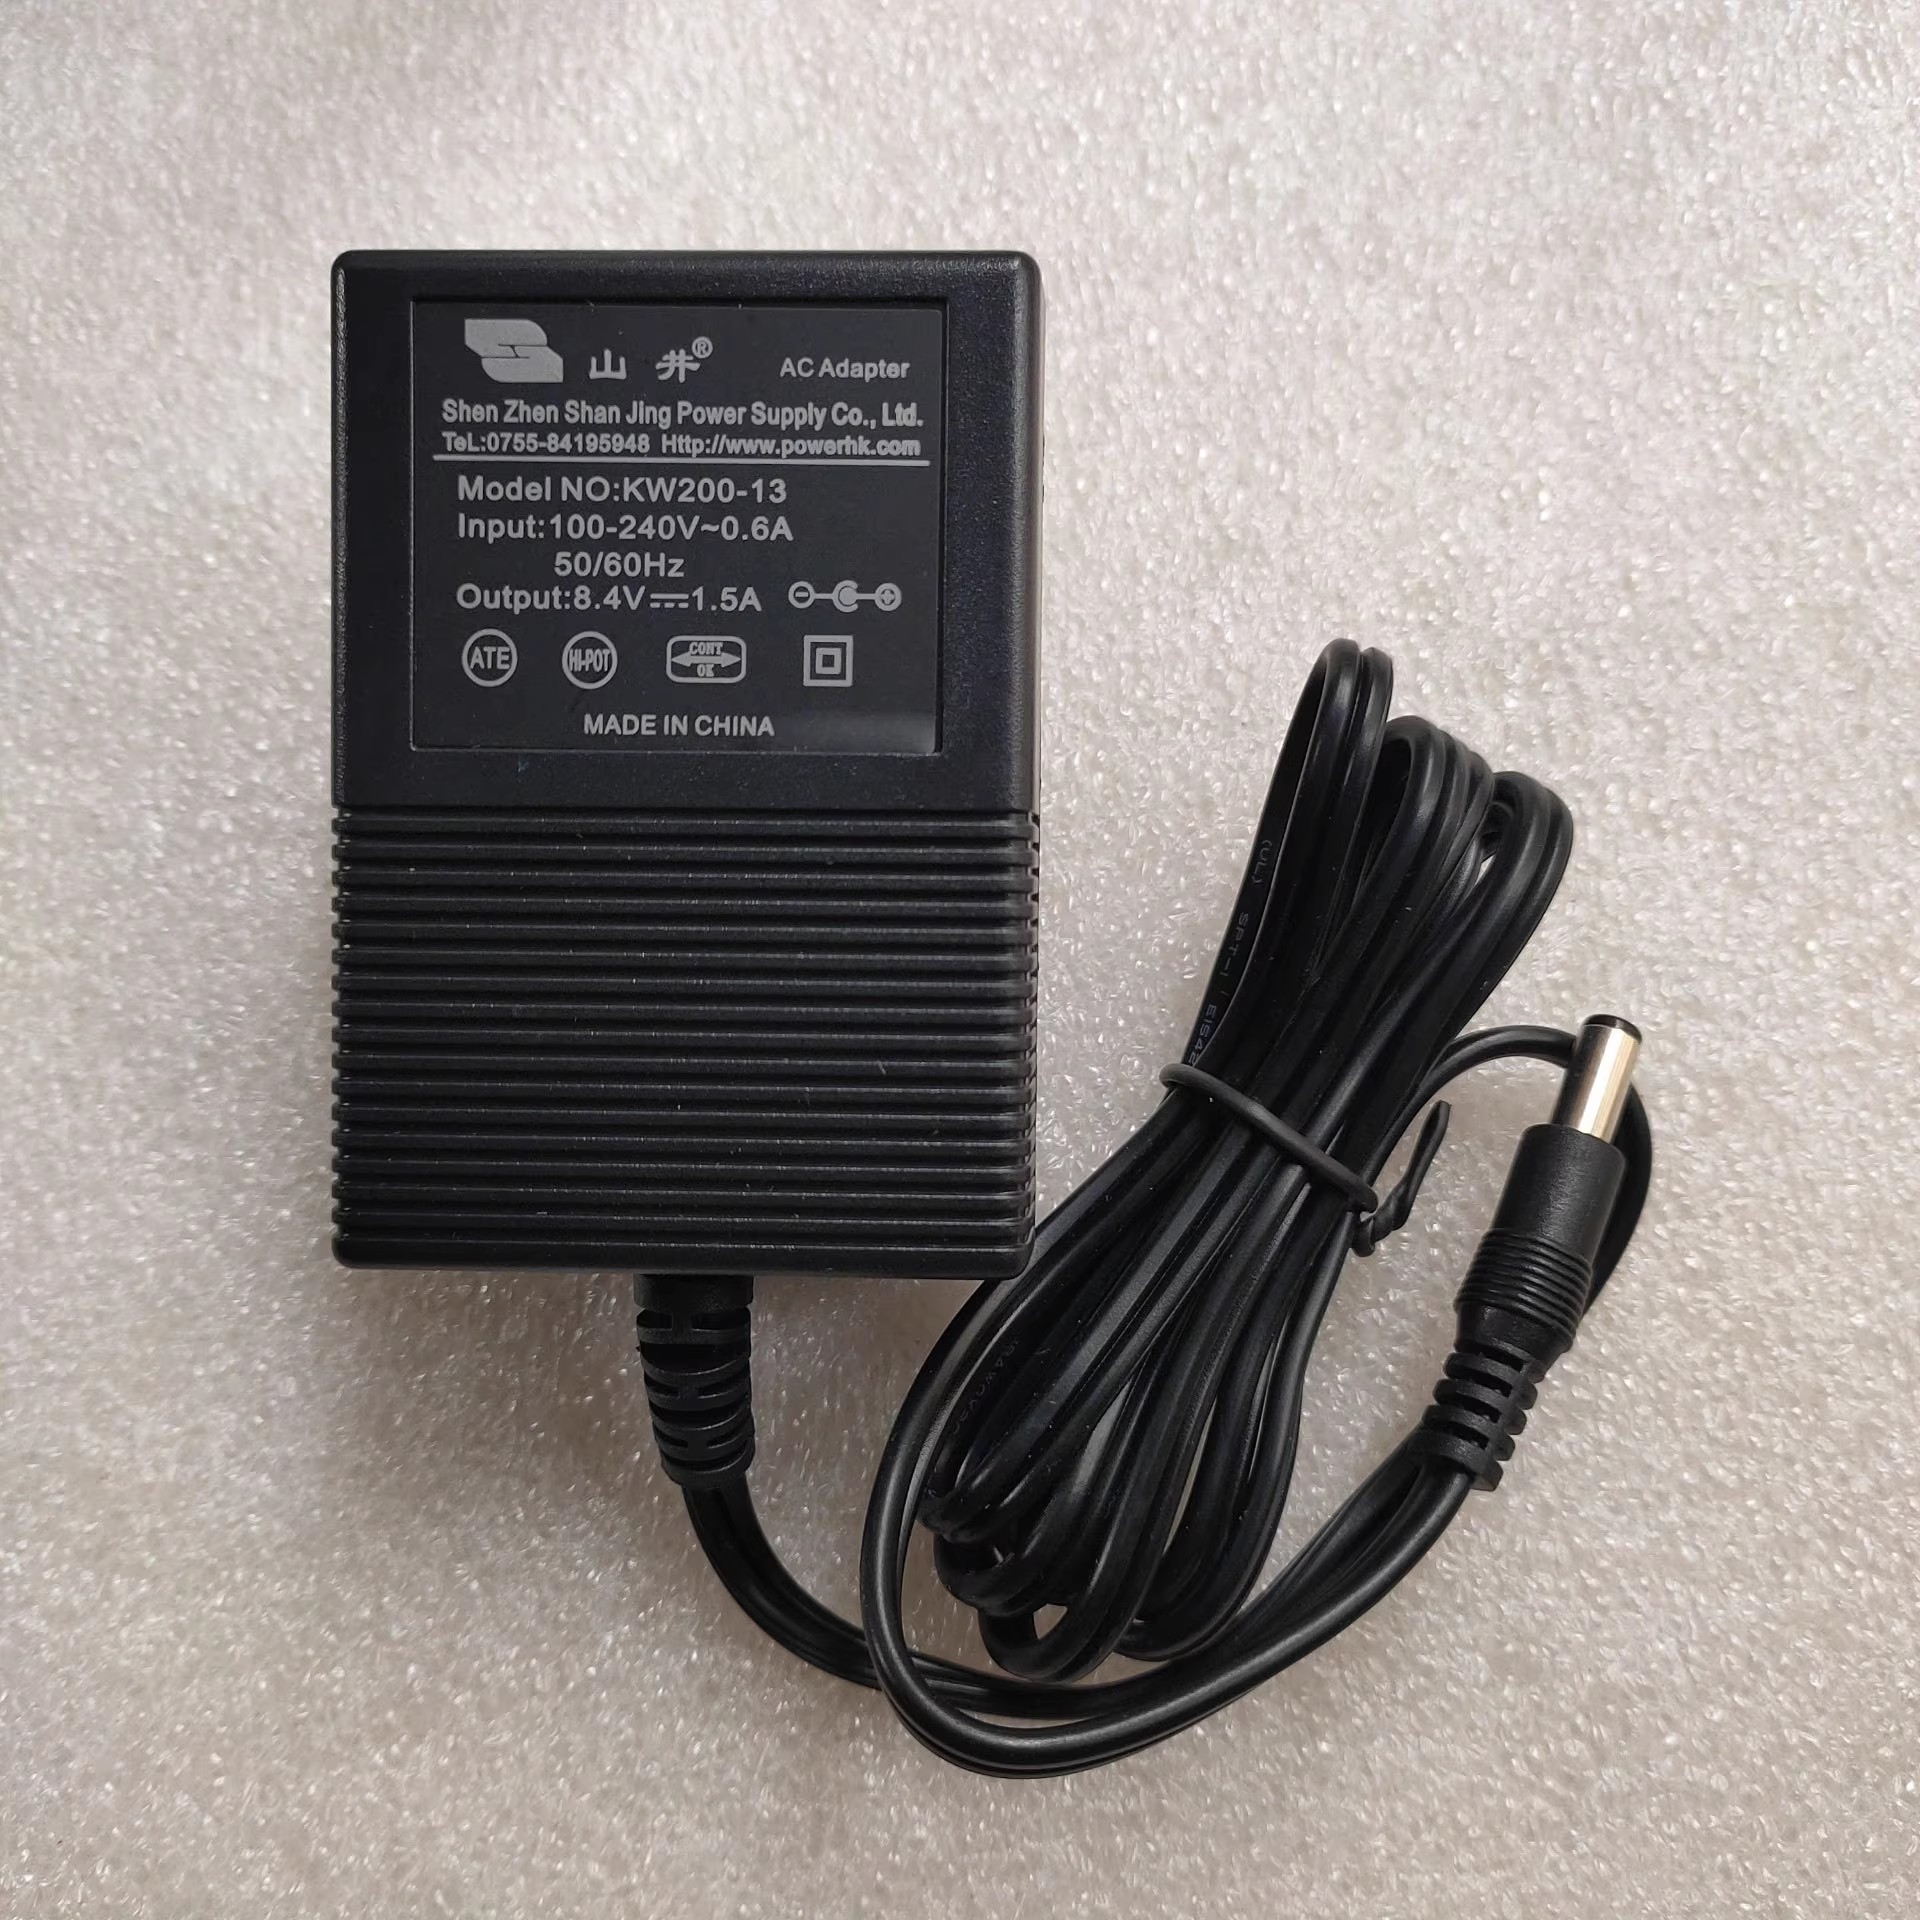 *Brand NEW* KW20-13 POWER Supply 8.4V 1.5A AC DC ADAPTHE